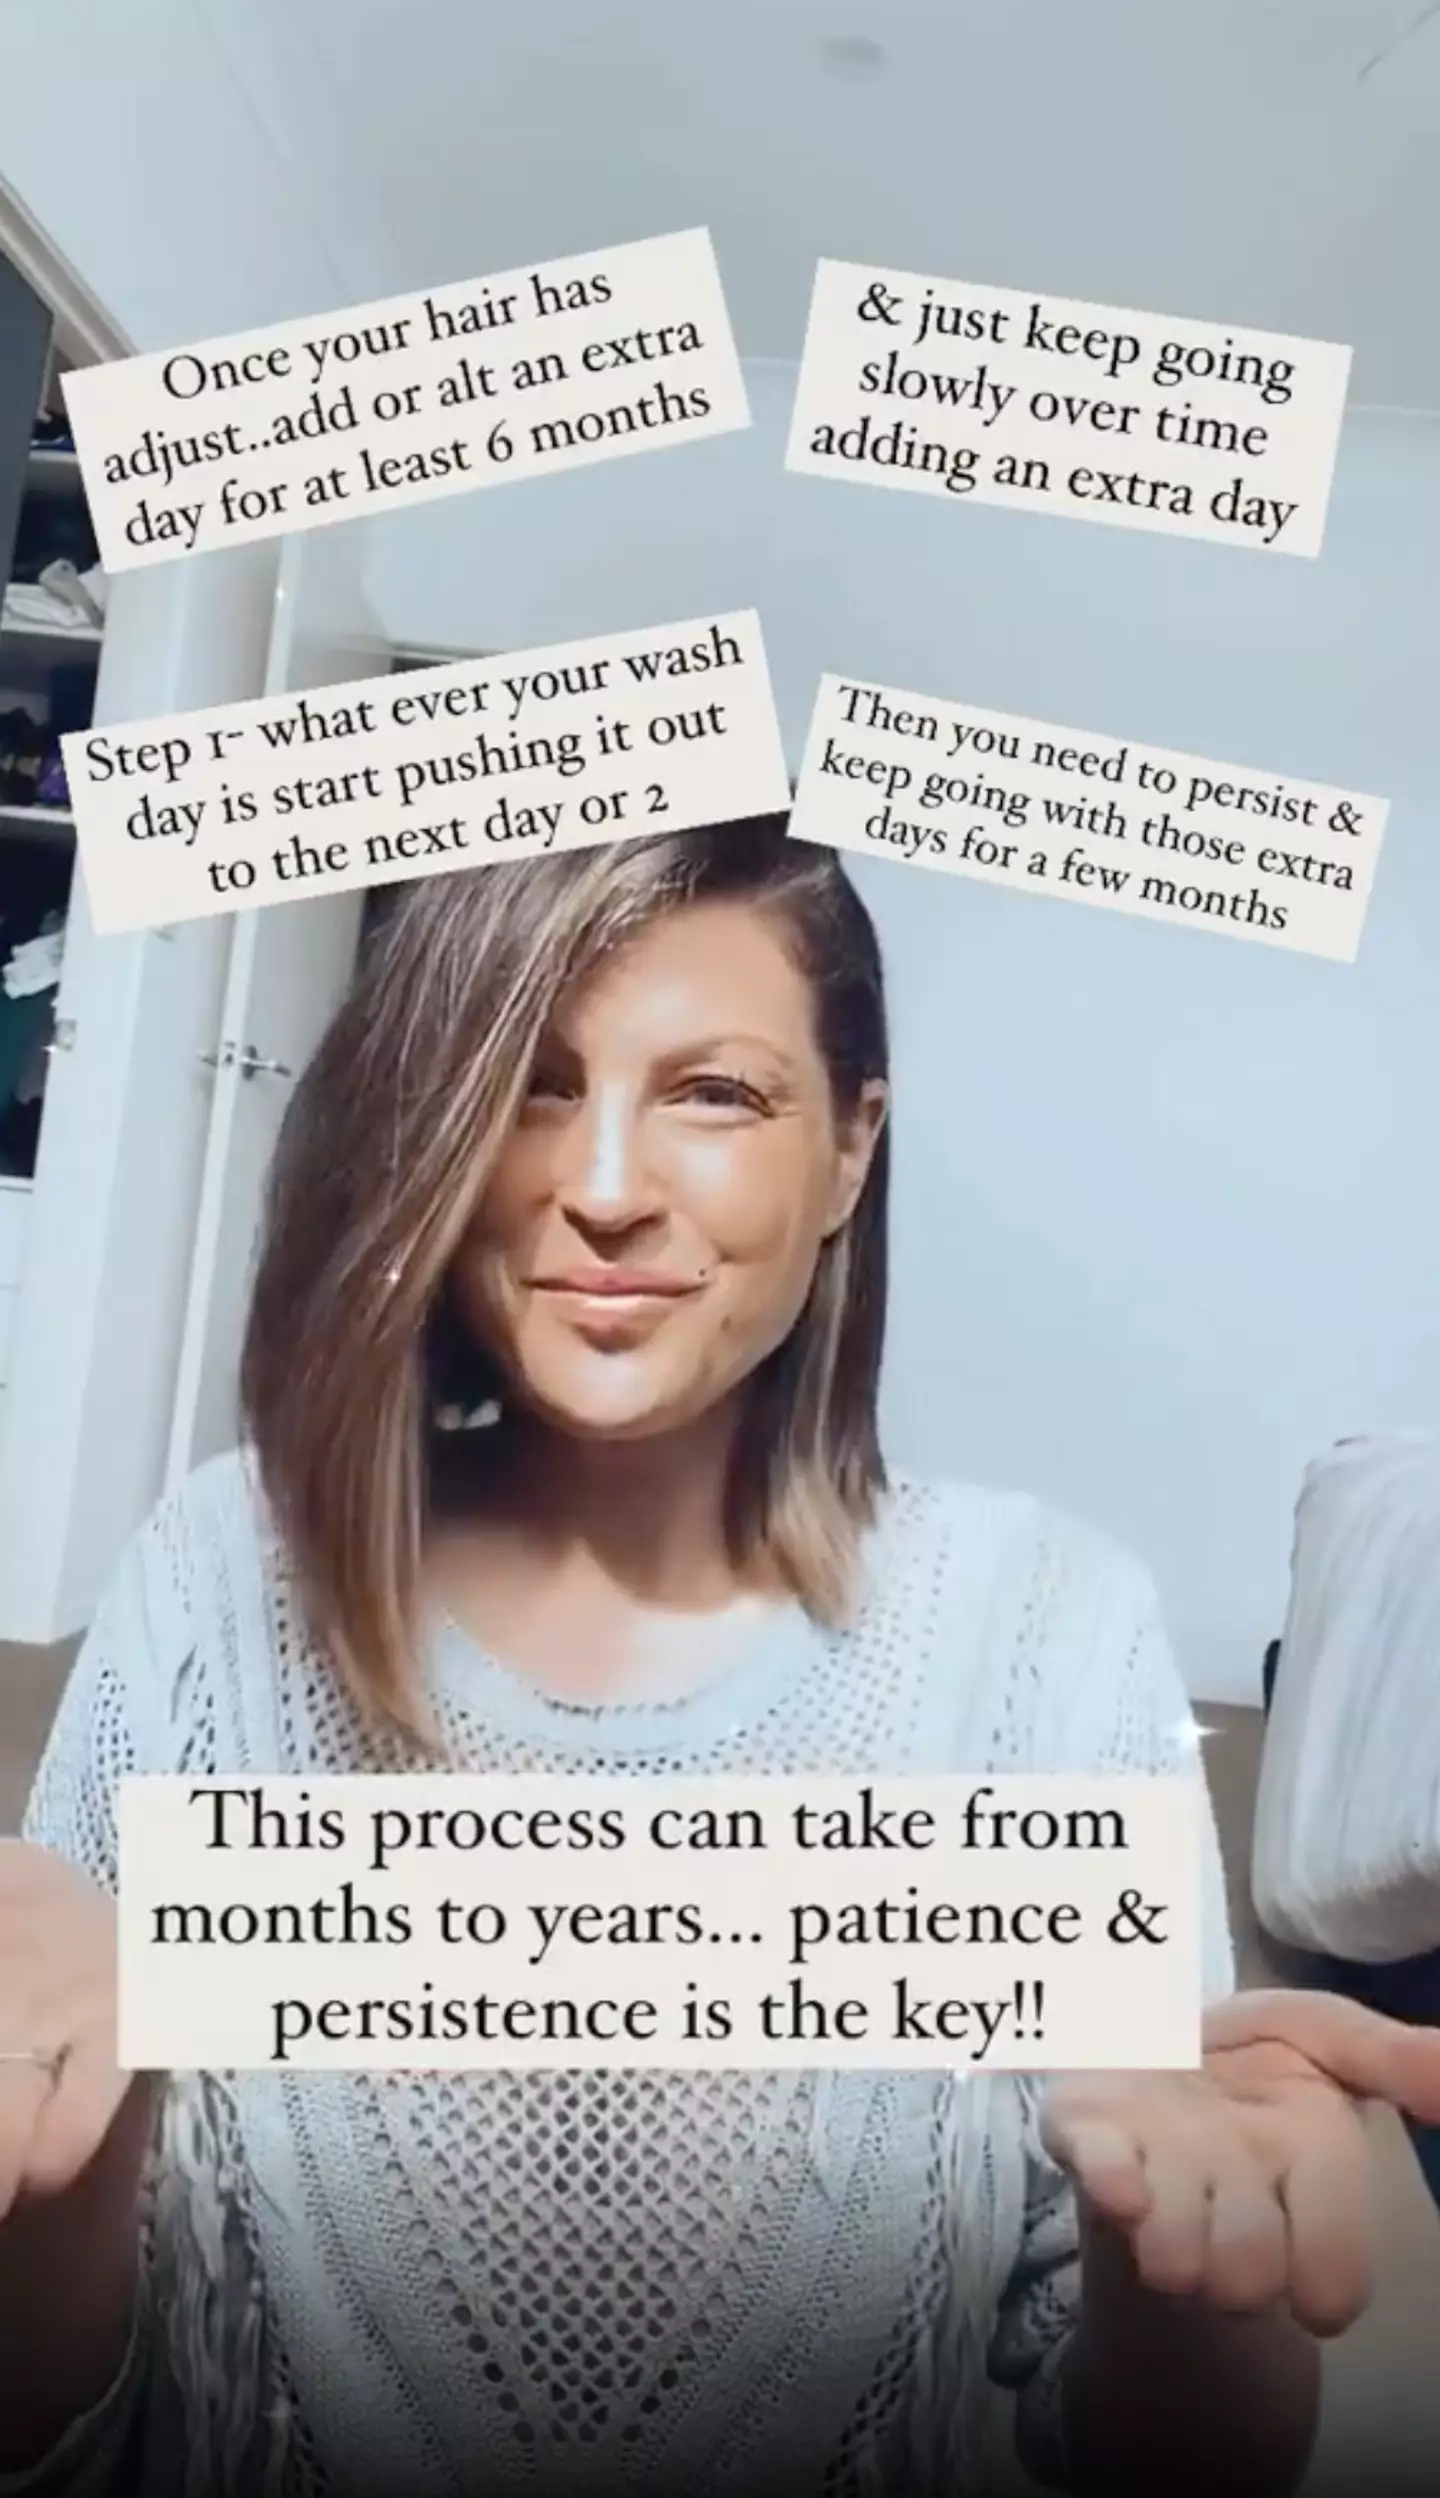 Michelle posted her tips for hair washing (